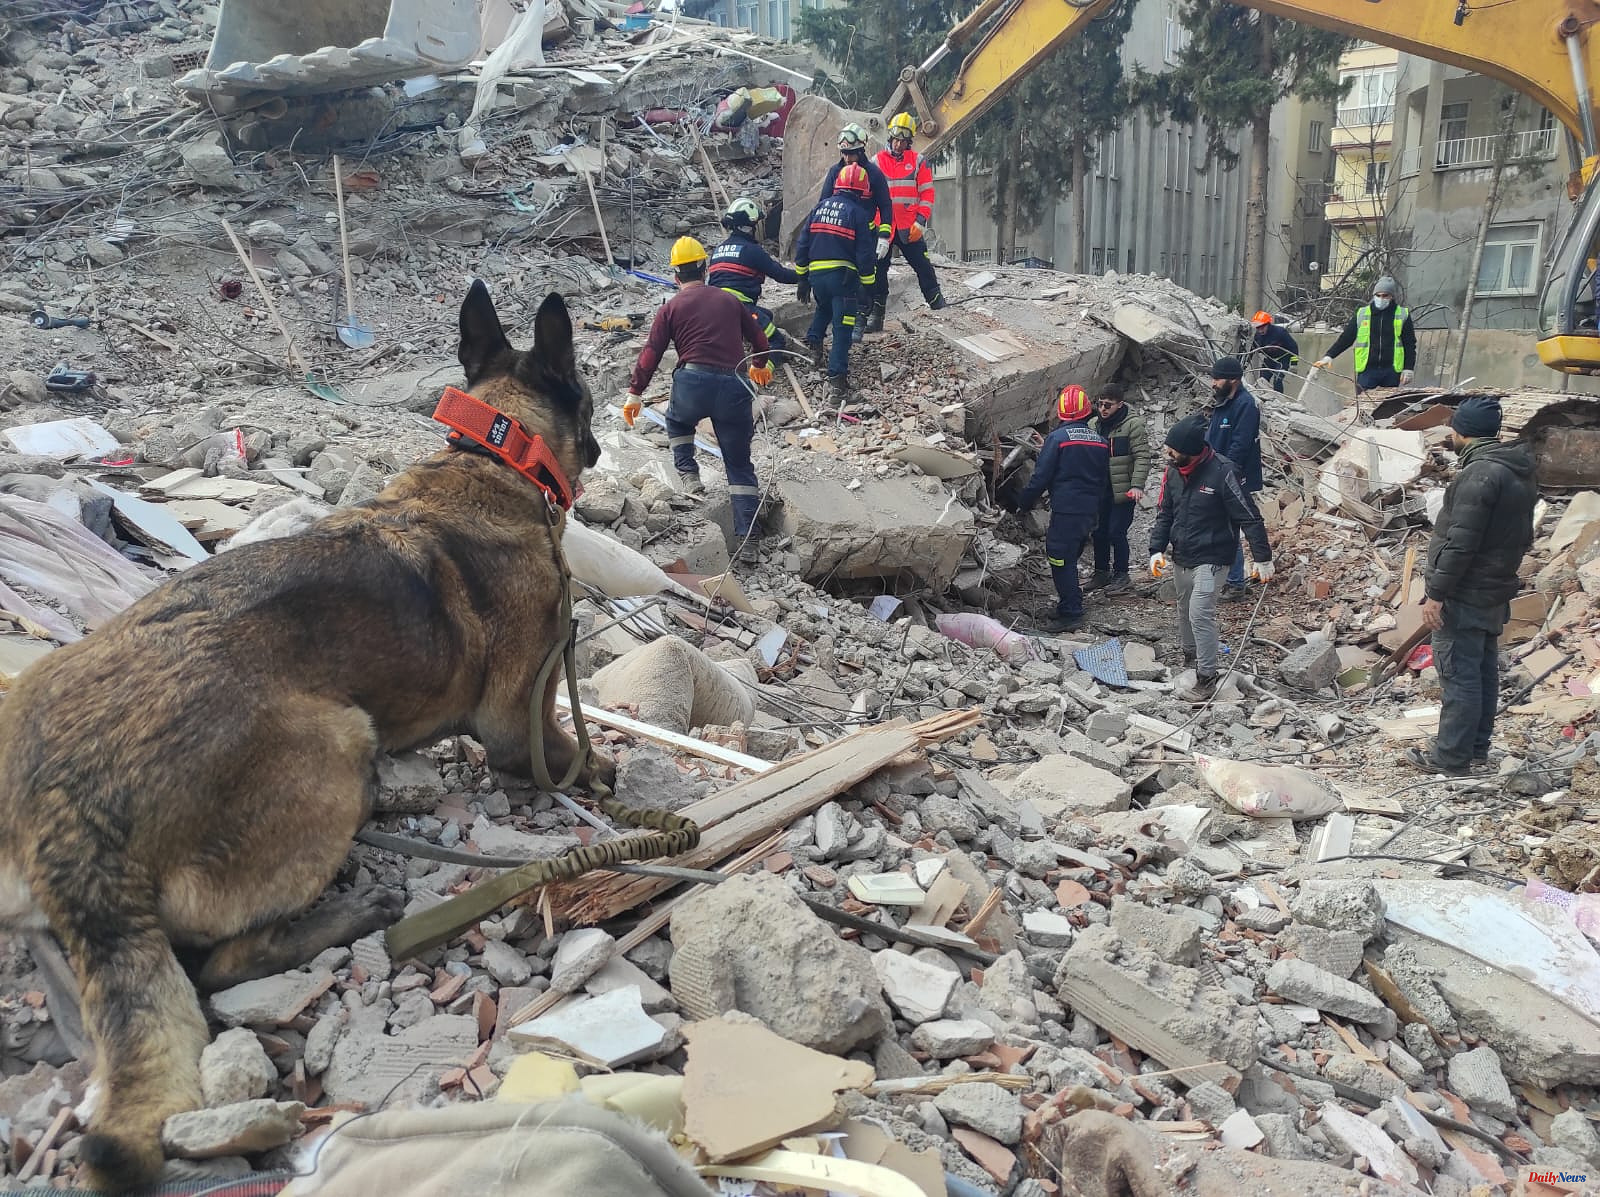 Turkey A 77-year-old woman is rescued alive from the rubble nine days after the earthquake that has left almost 40,000 dead